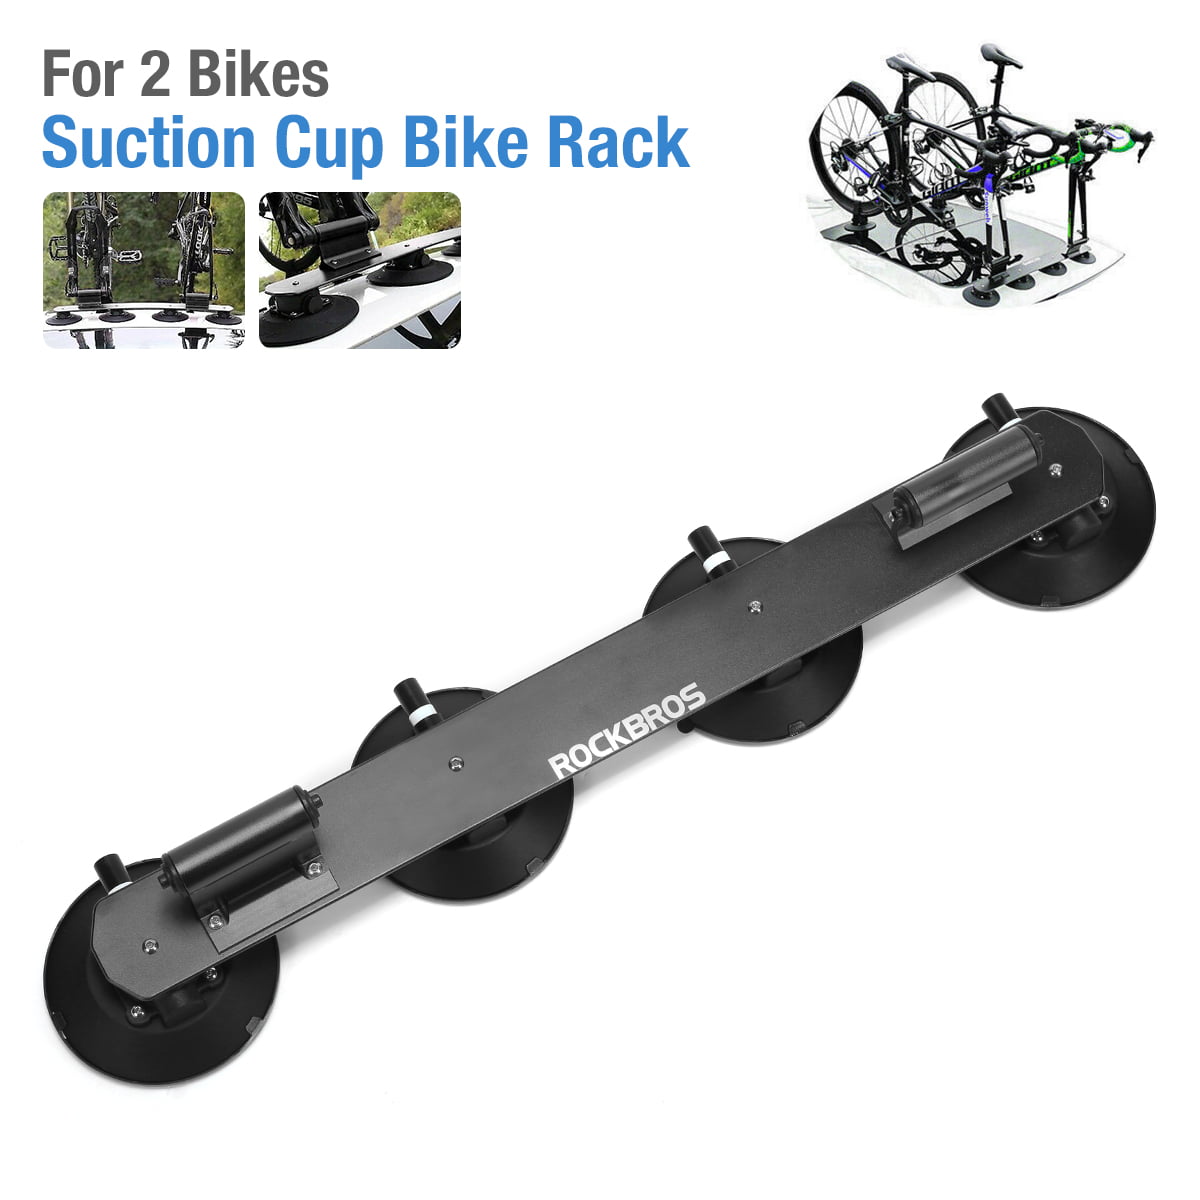 ROCKBROS Rooftop Bike Rack Car Roof Rack Rooftop Quick Release Aluminium Alloy Bicycle Roof Rack Suction Cup Car Roof Rack 